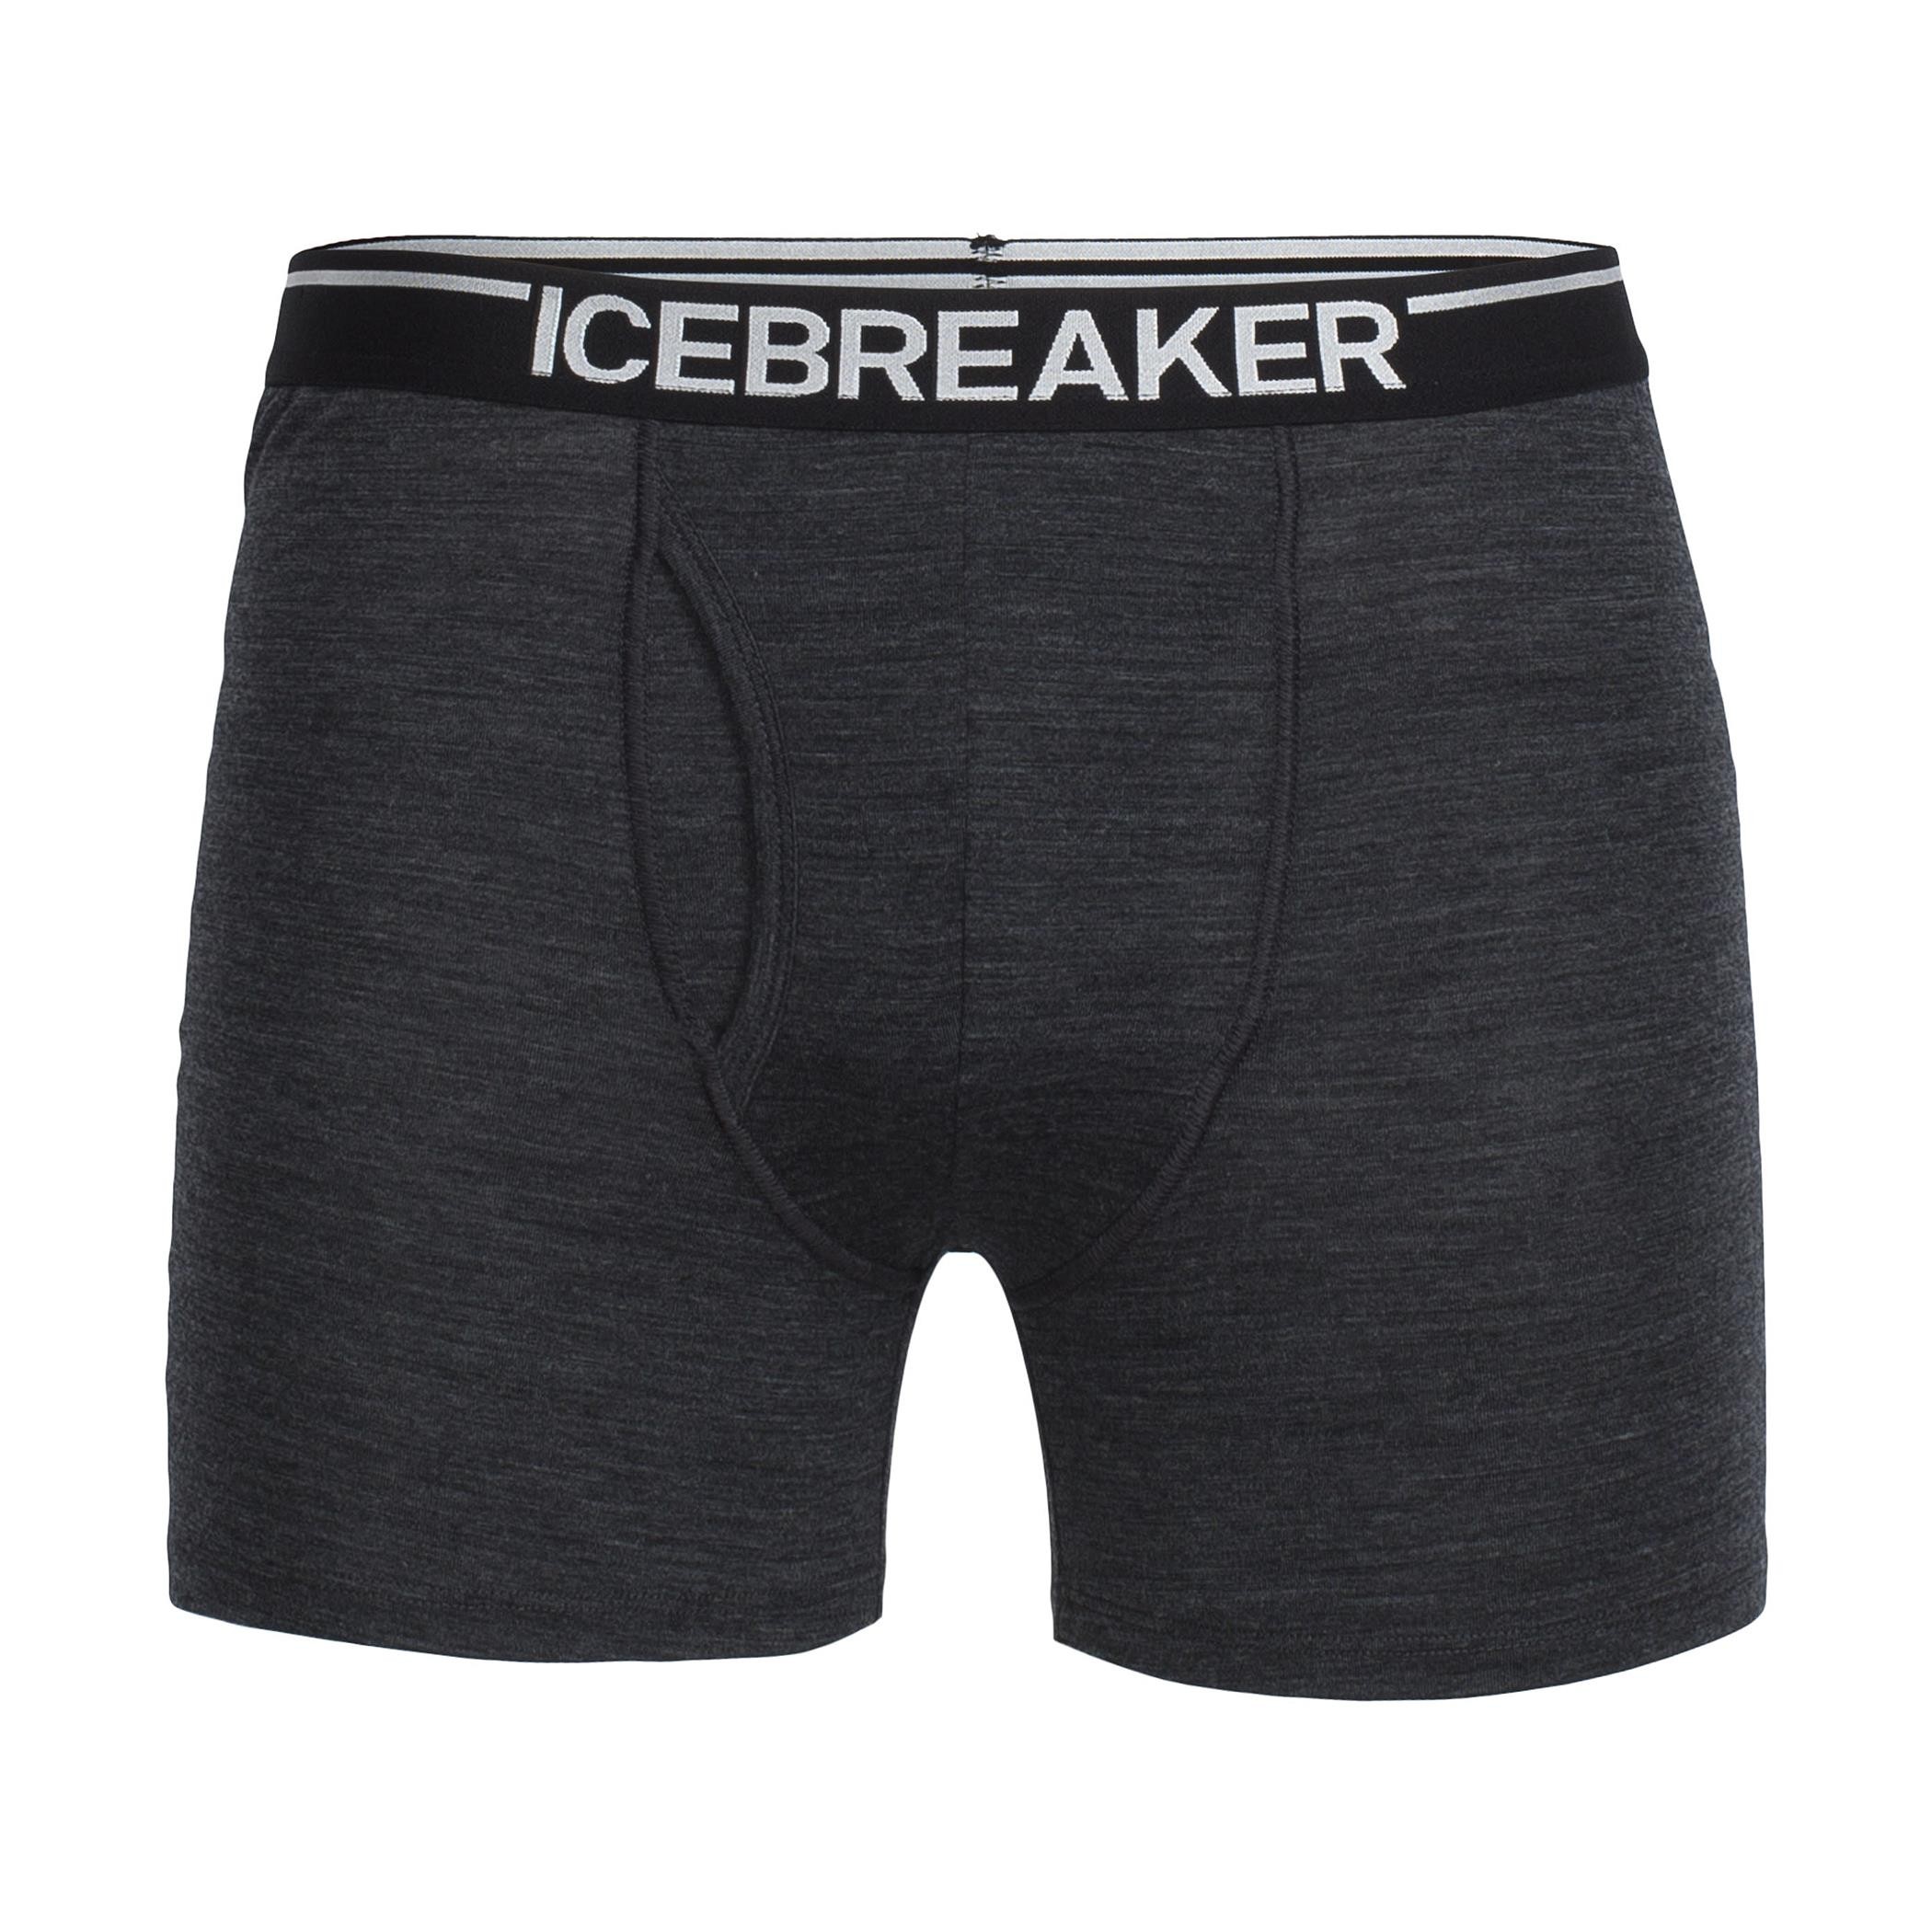 Icebreaker Anatomica boxers should be part of a travelling man’s wash-and-wear wardrobe.